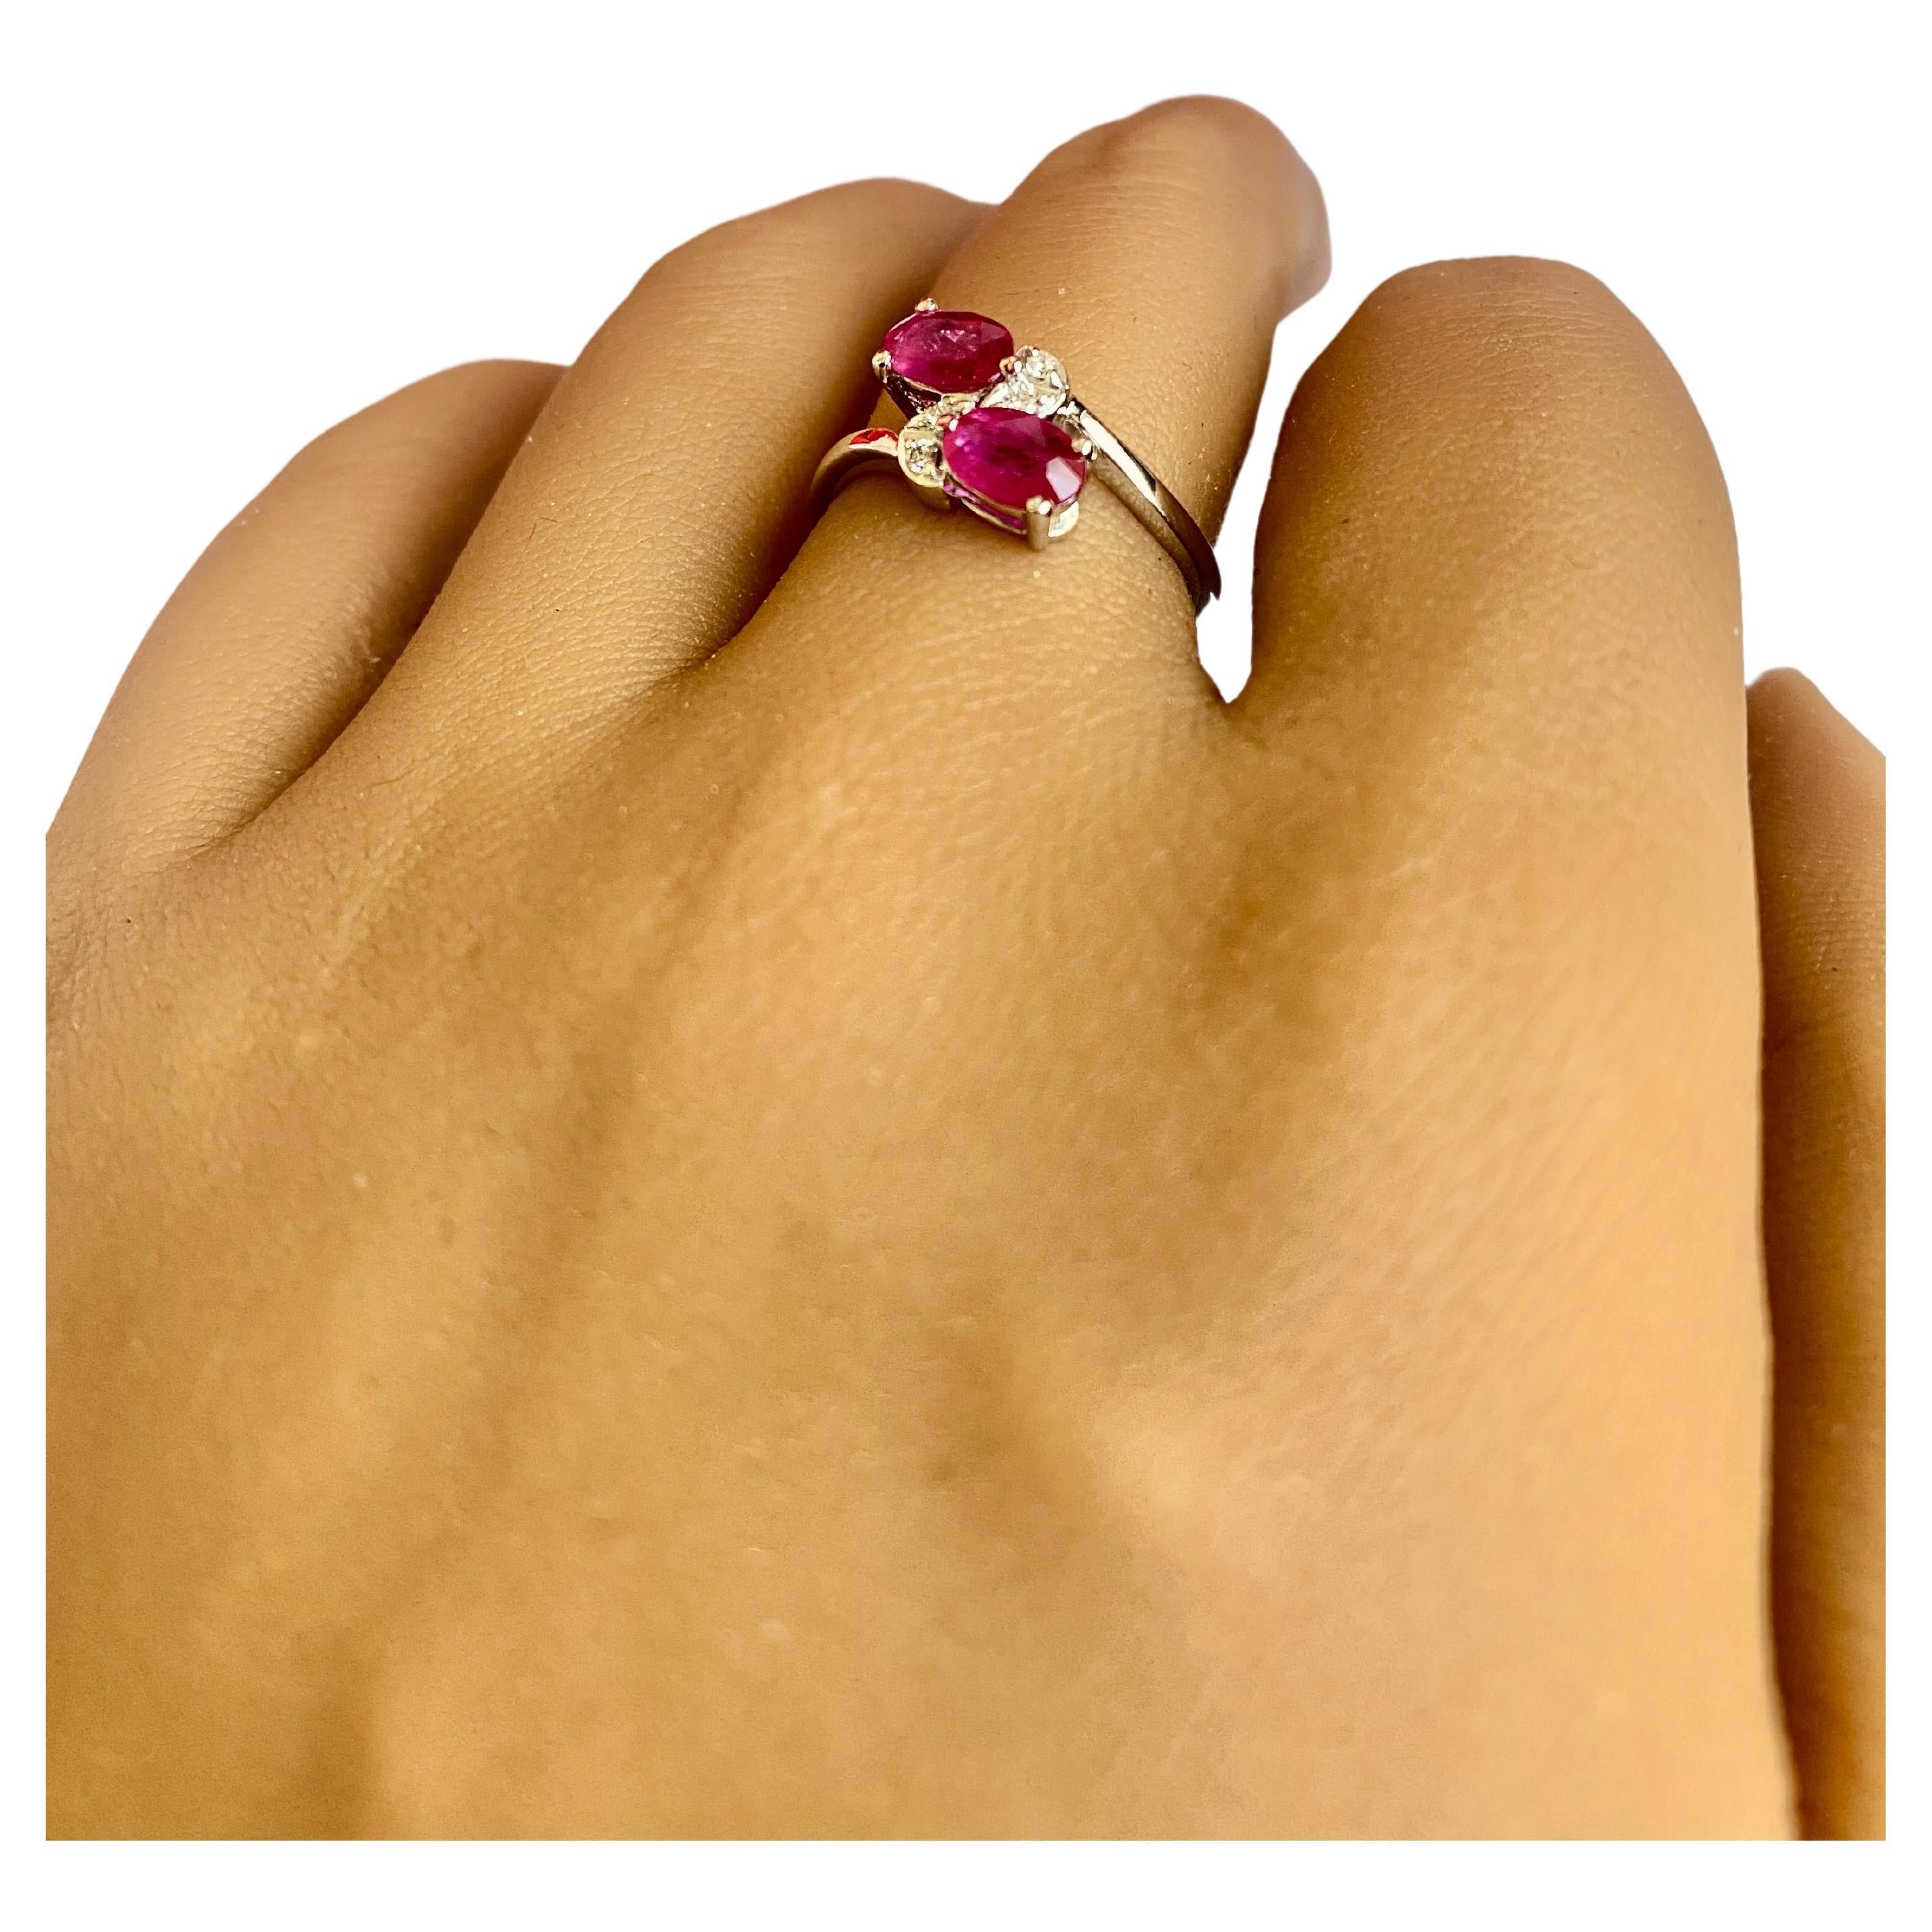 Ruby and Diamond Solitaire Ring with Natural Gemstone, 2 Stone Ring in 14k Gold For Sale